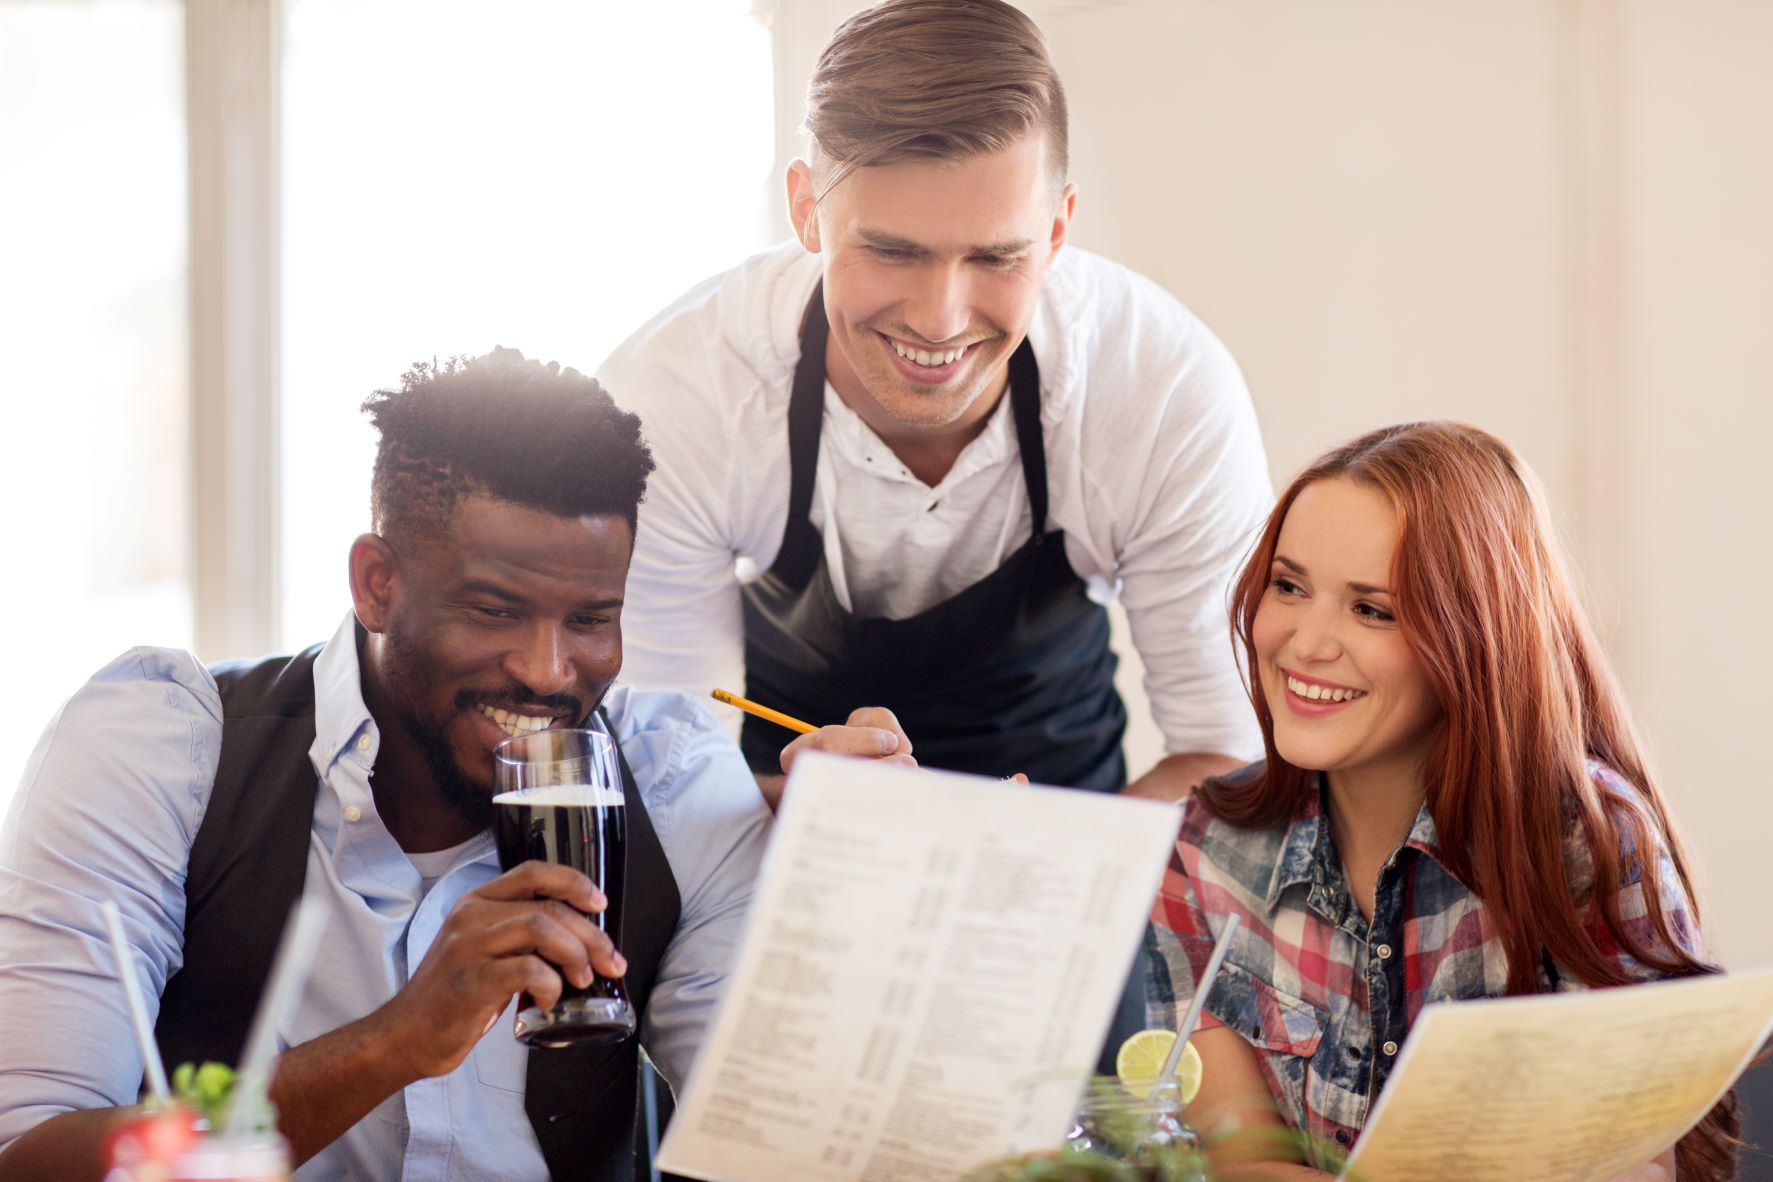 10 Ways to Reach New Customers at Your Restaurant